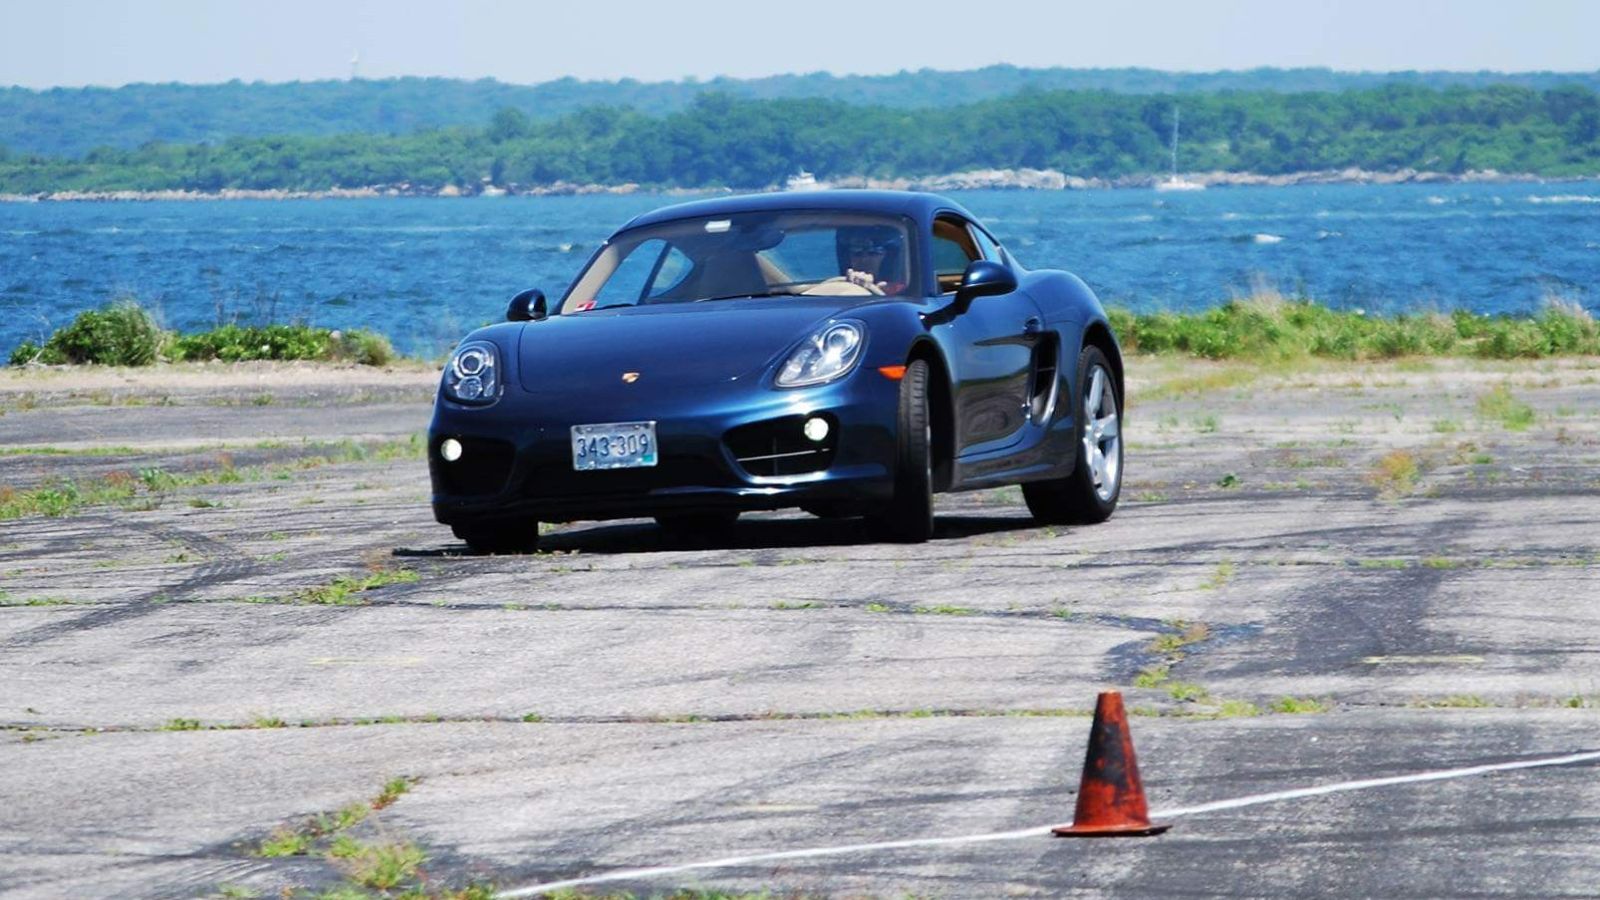 Illustration for article titled Porsche Cayman S 2 Year AMA: ANSWERS